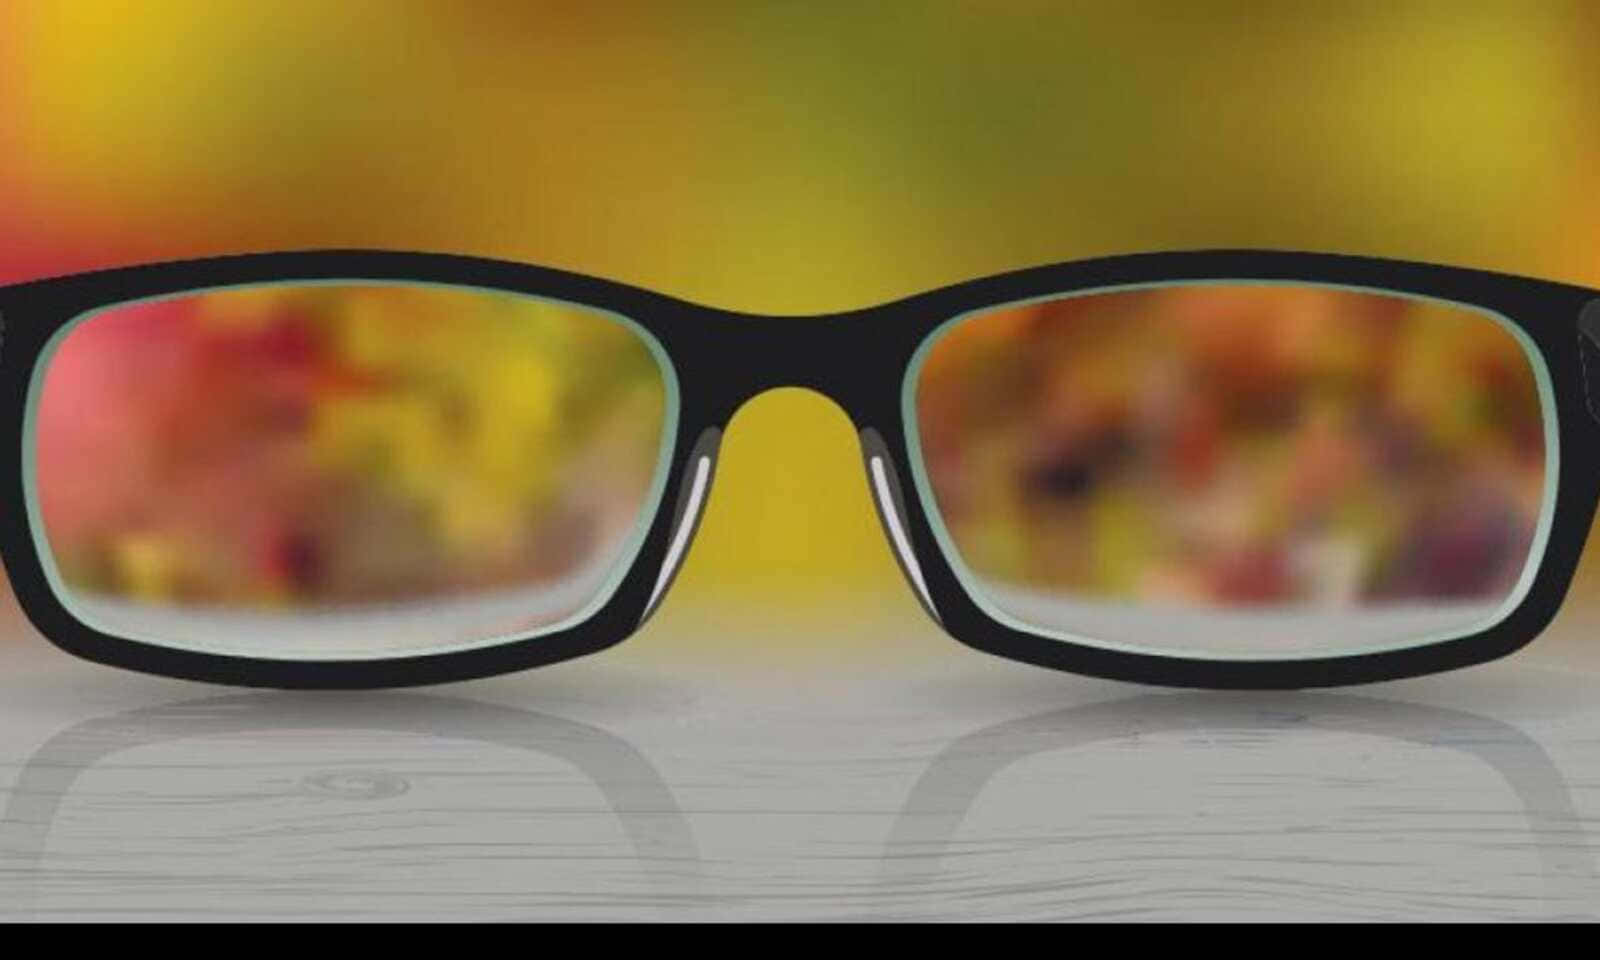 Myopic Eyeglasses With A Blurry Vision Wallpaper